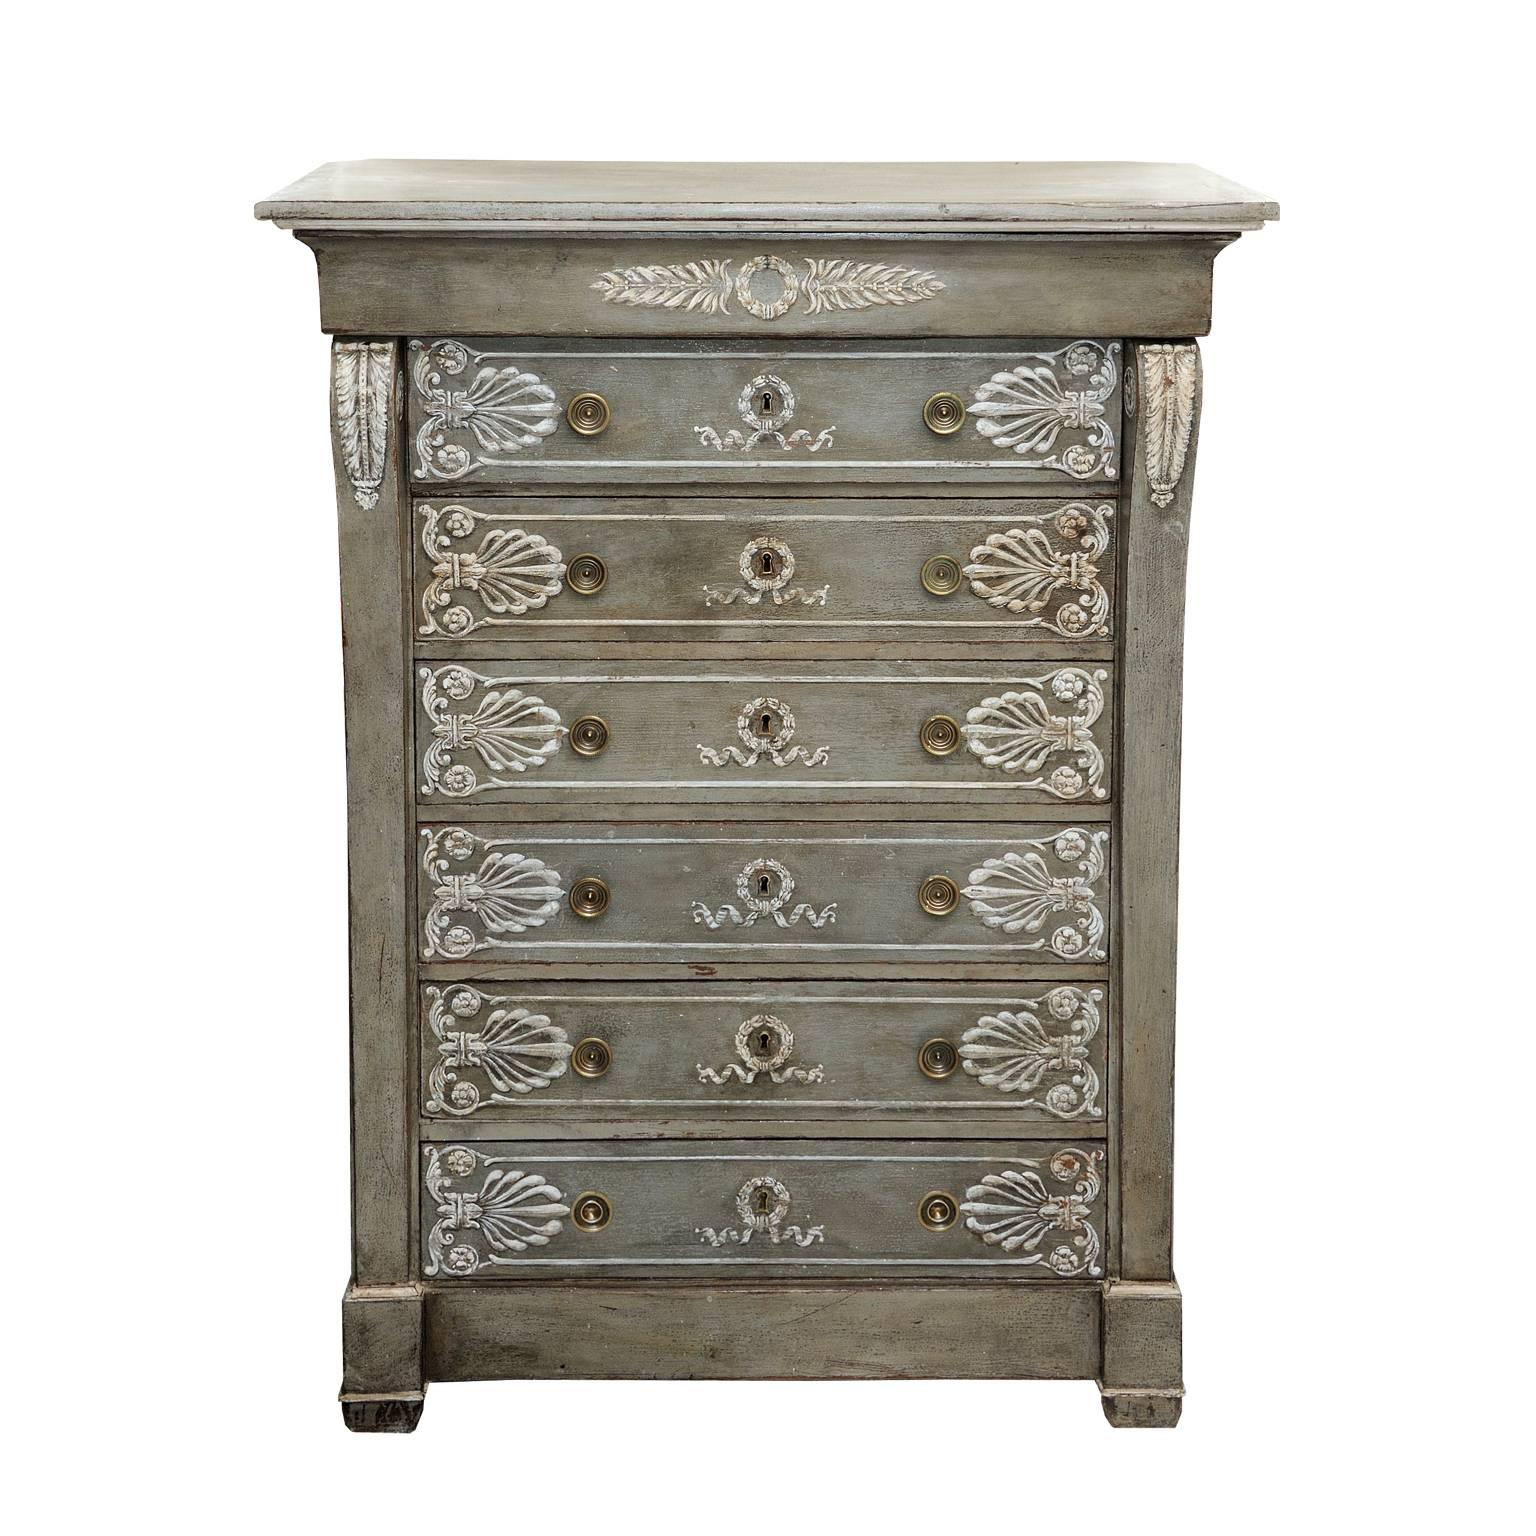 This is a rather stylish tall French early 19th century Empire period grey painted seven-drawer commode or chest of drawers (also known as a semainier). Featuring seven opening drawers and beautiful white and grey painted decoration, fitted with